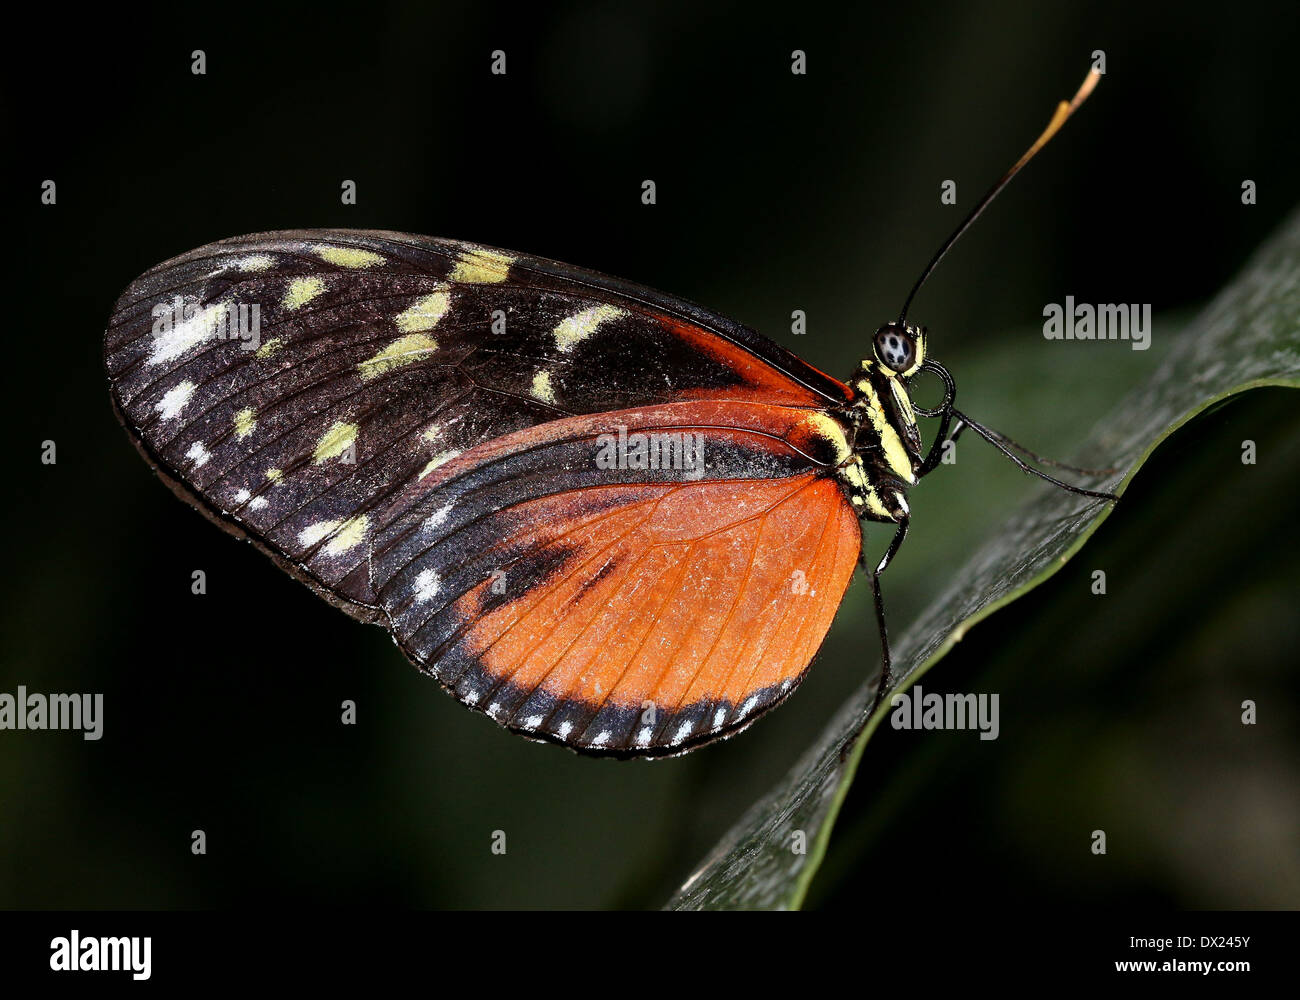 Tiger Longwing, Hecale Longwing or Golden Longwing butterfly (Heliconius Hecale) posing on a leaf Stock Photo